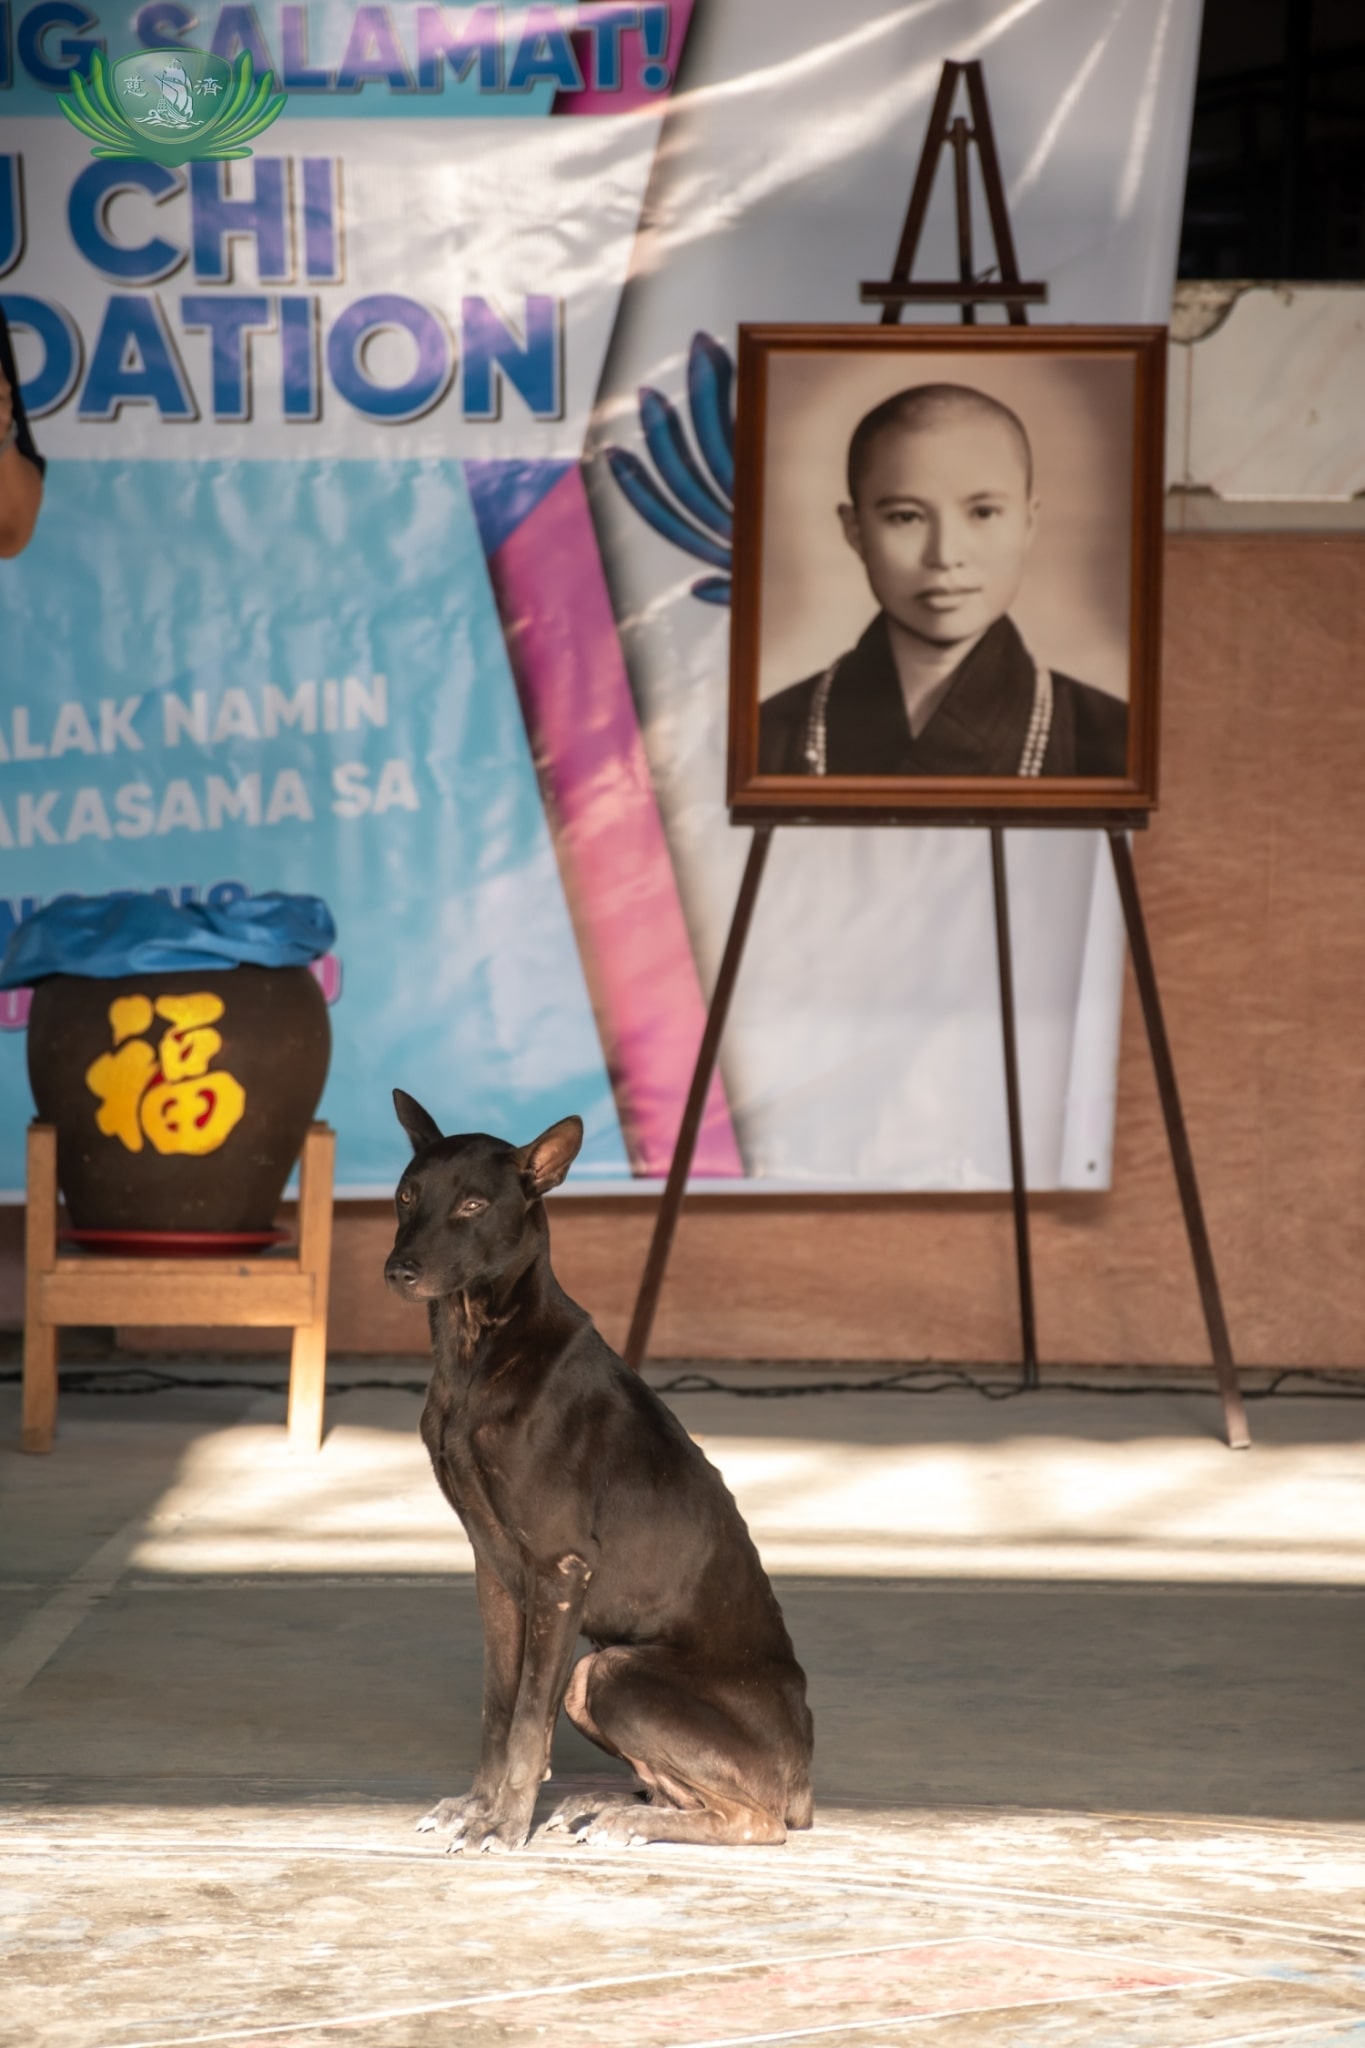 A stray dog appears to guard the portrait of Dharma Master Cheng Yen. 